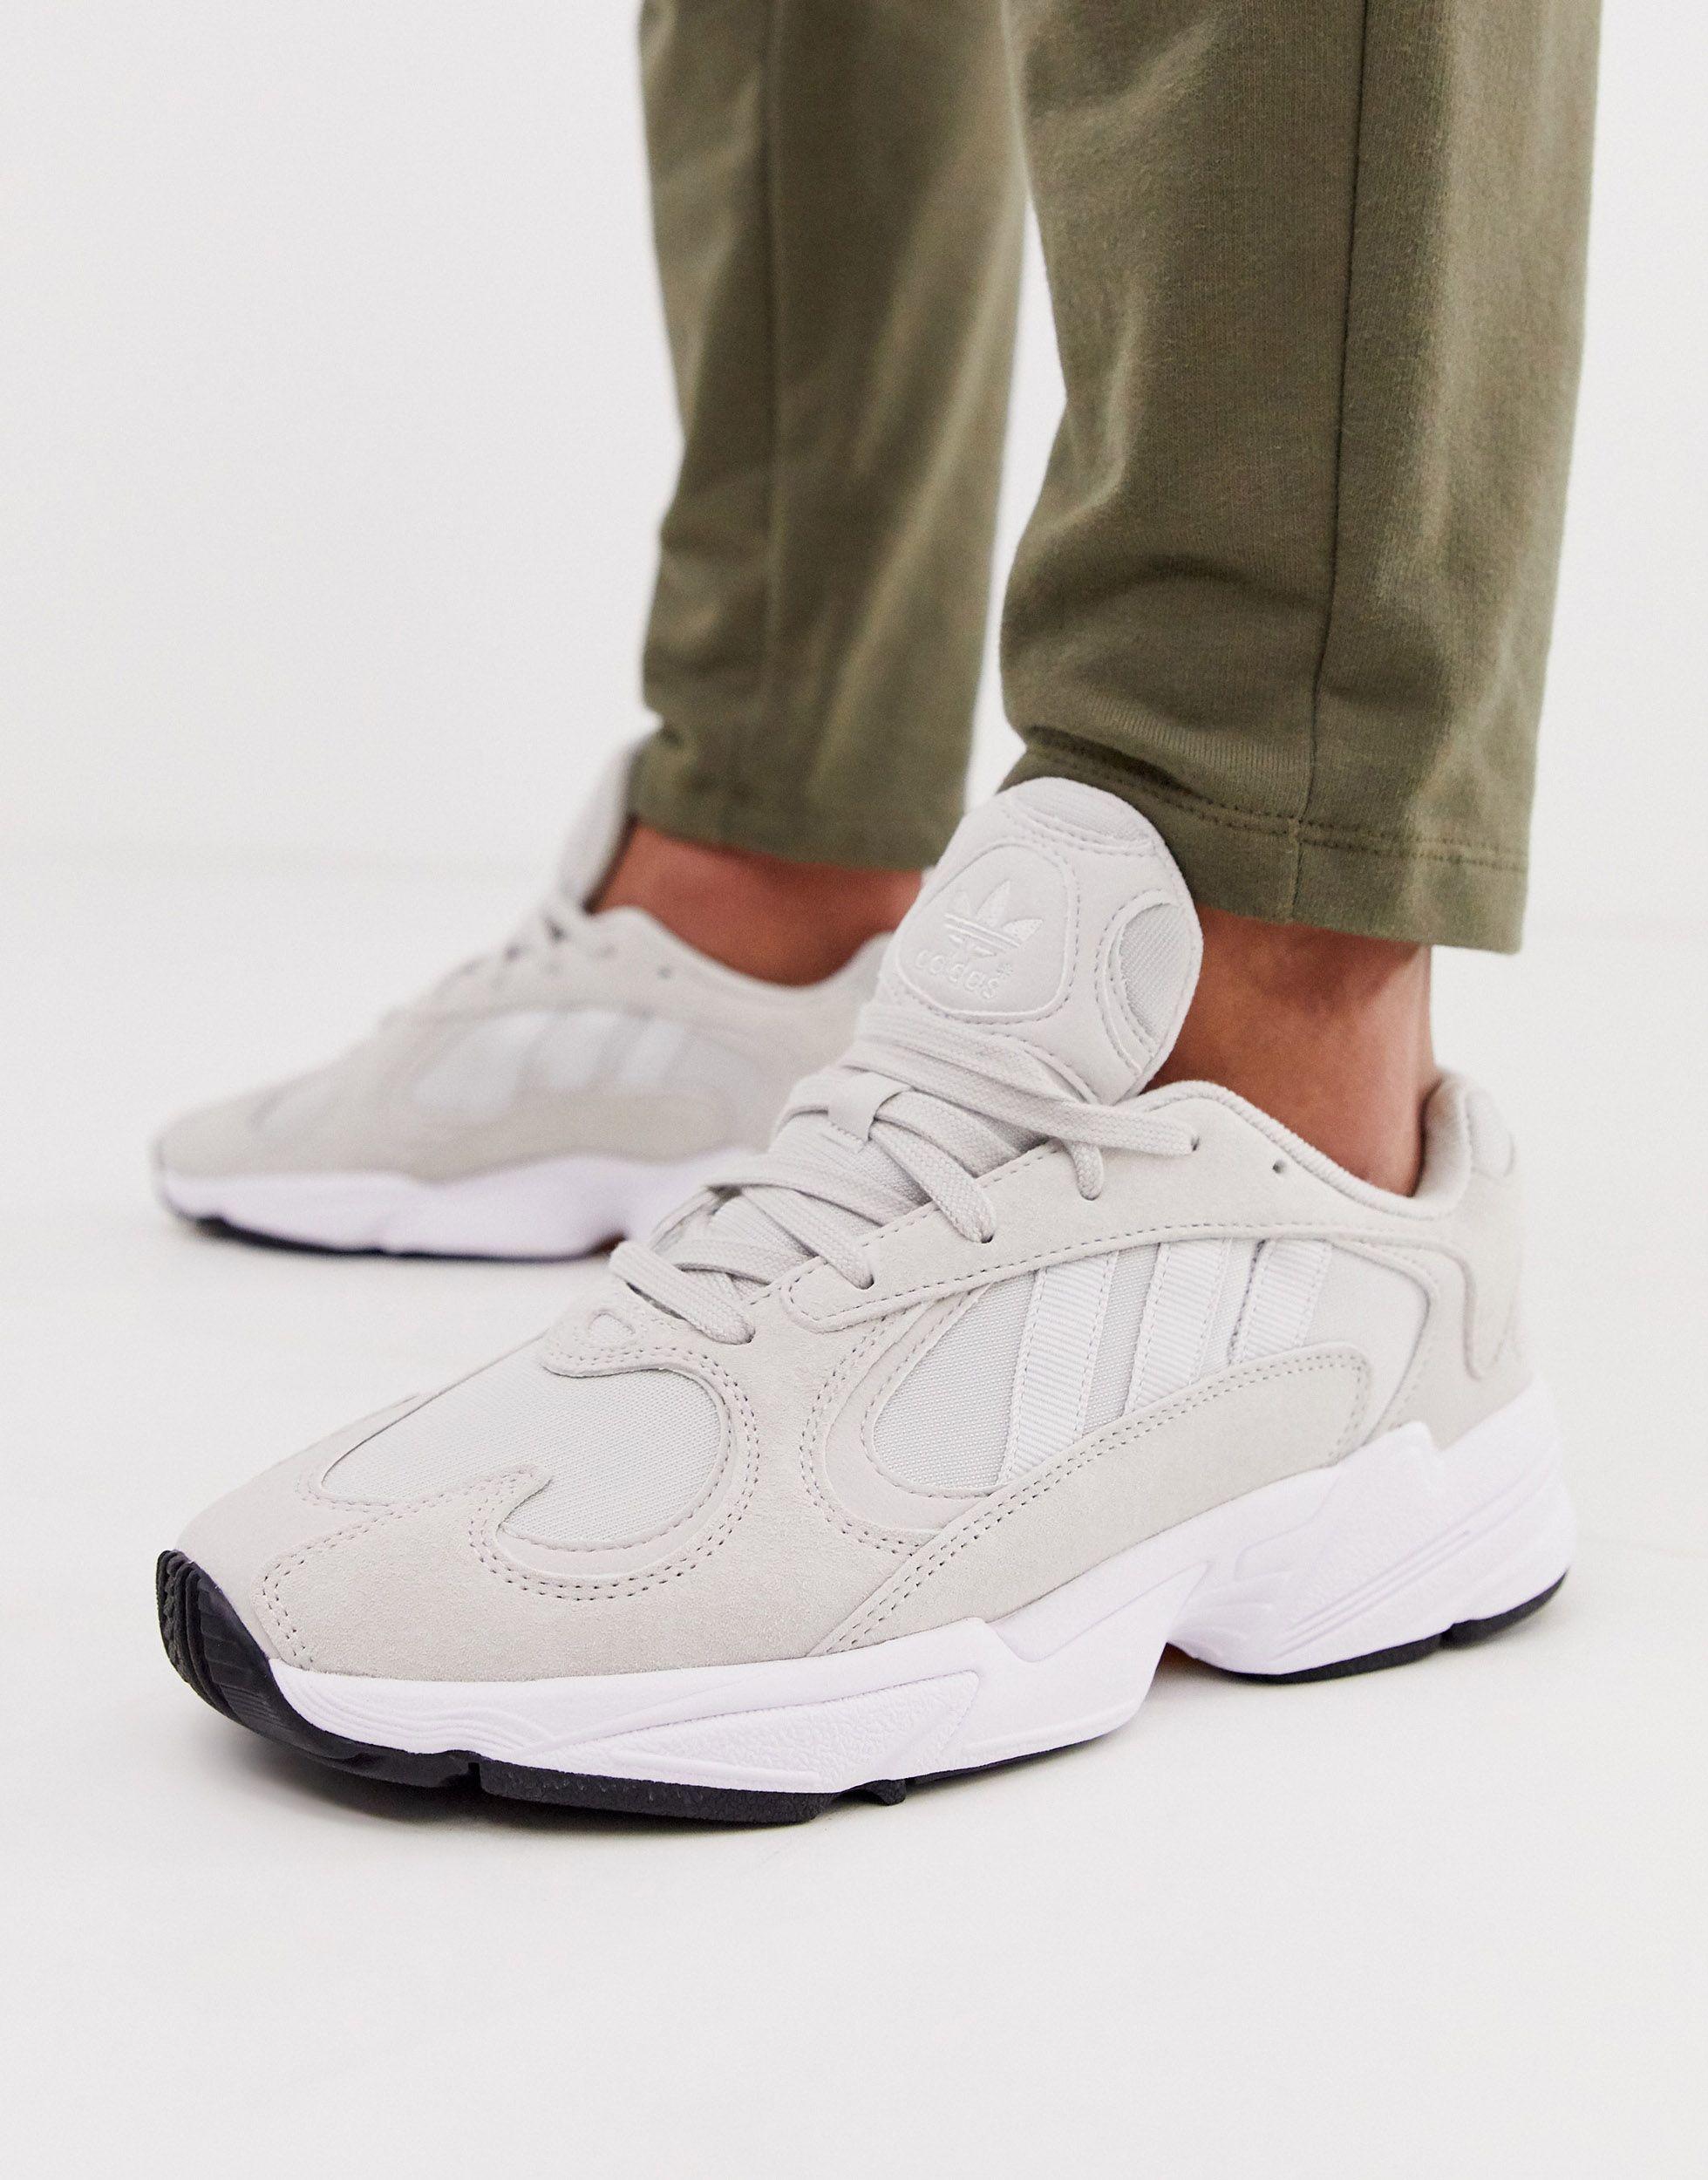 adidas originals all white leather yung 1 trainers